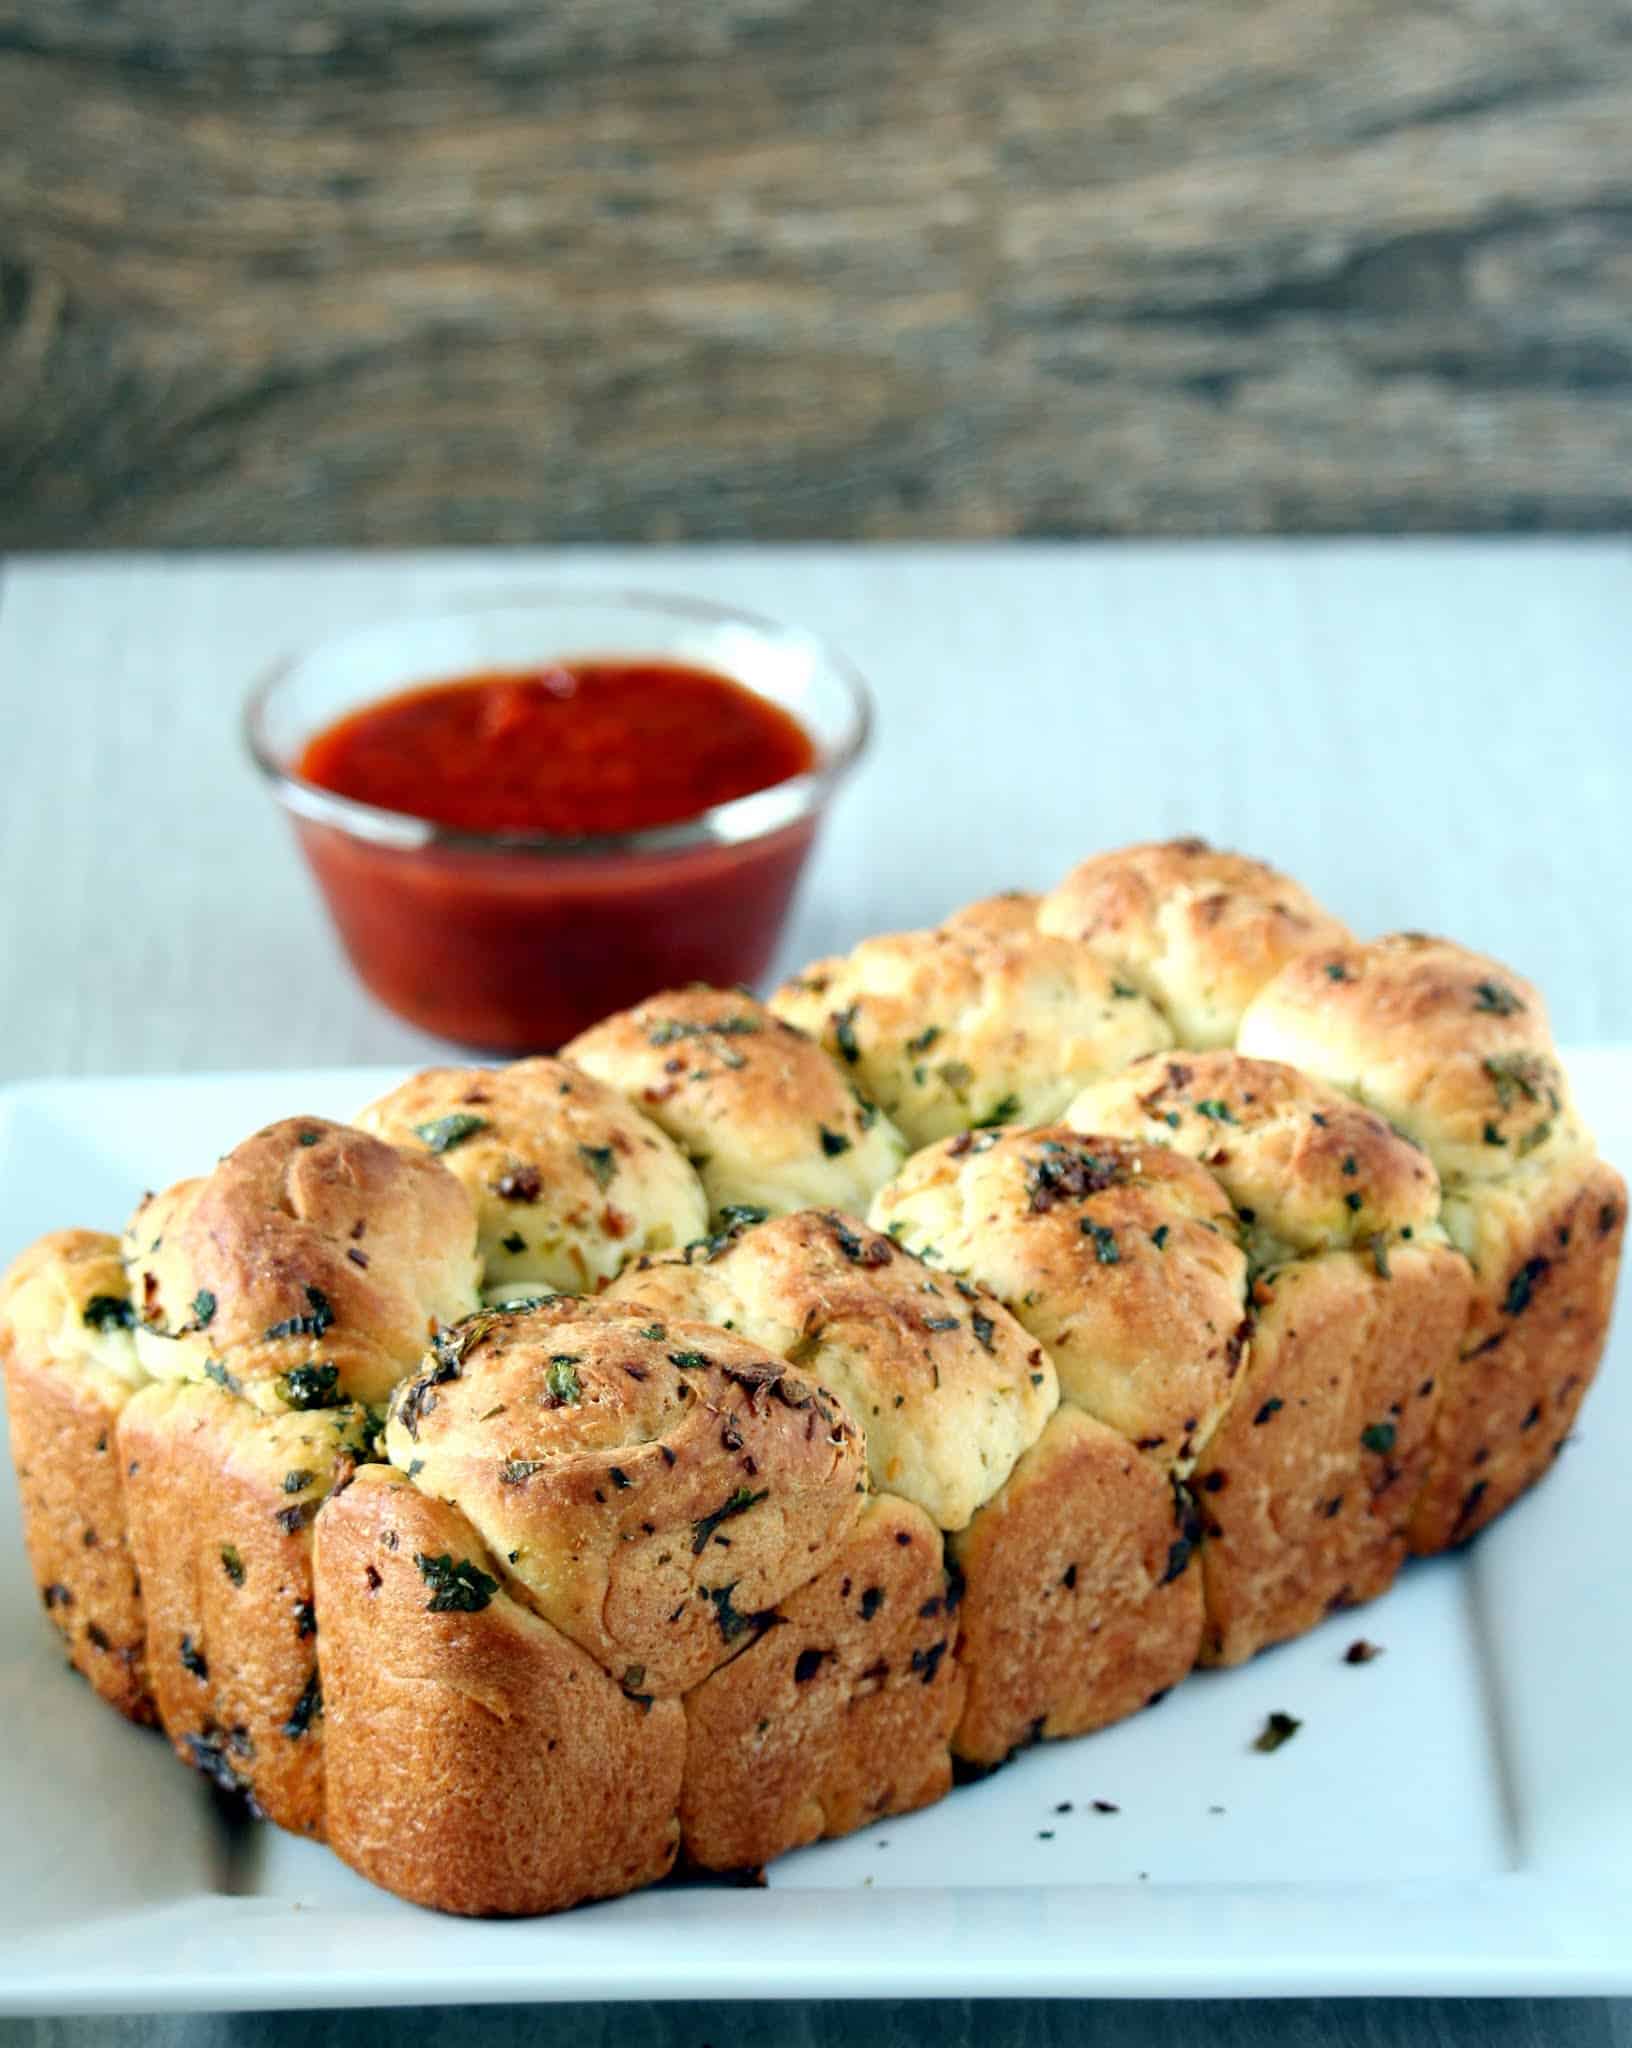 Pull apart Garlic Bread with tomato sauce in the background